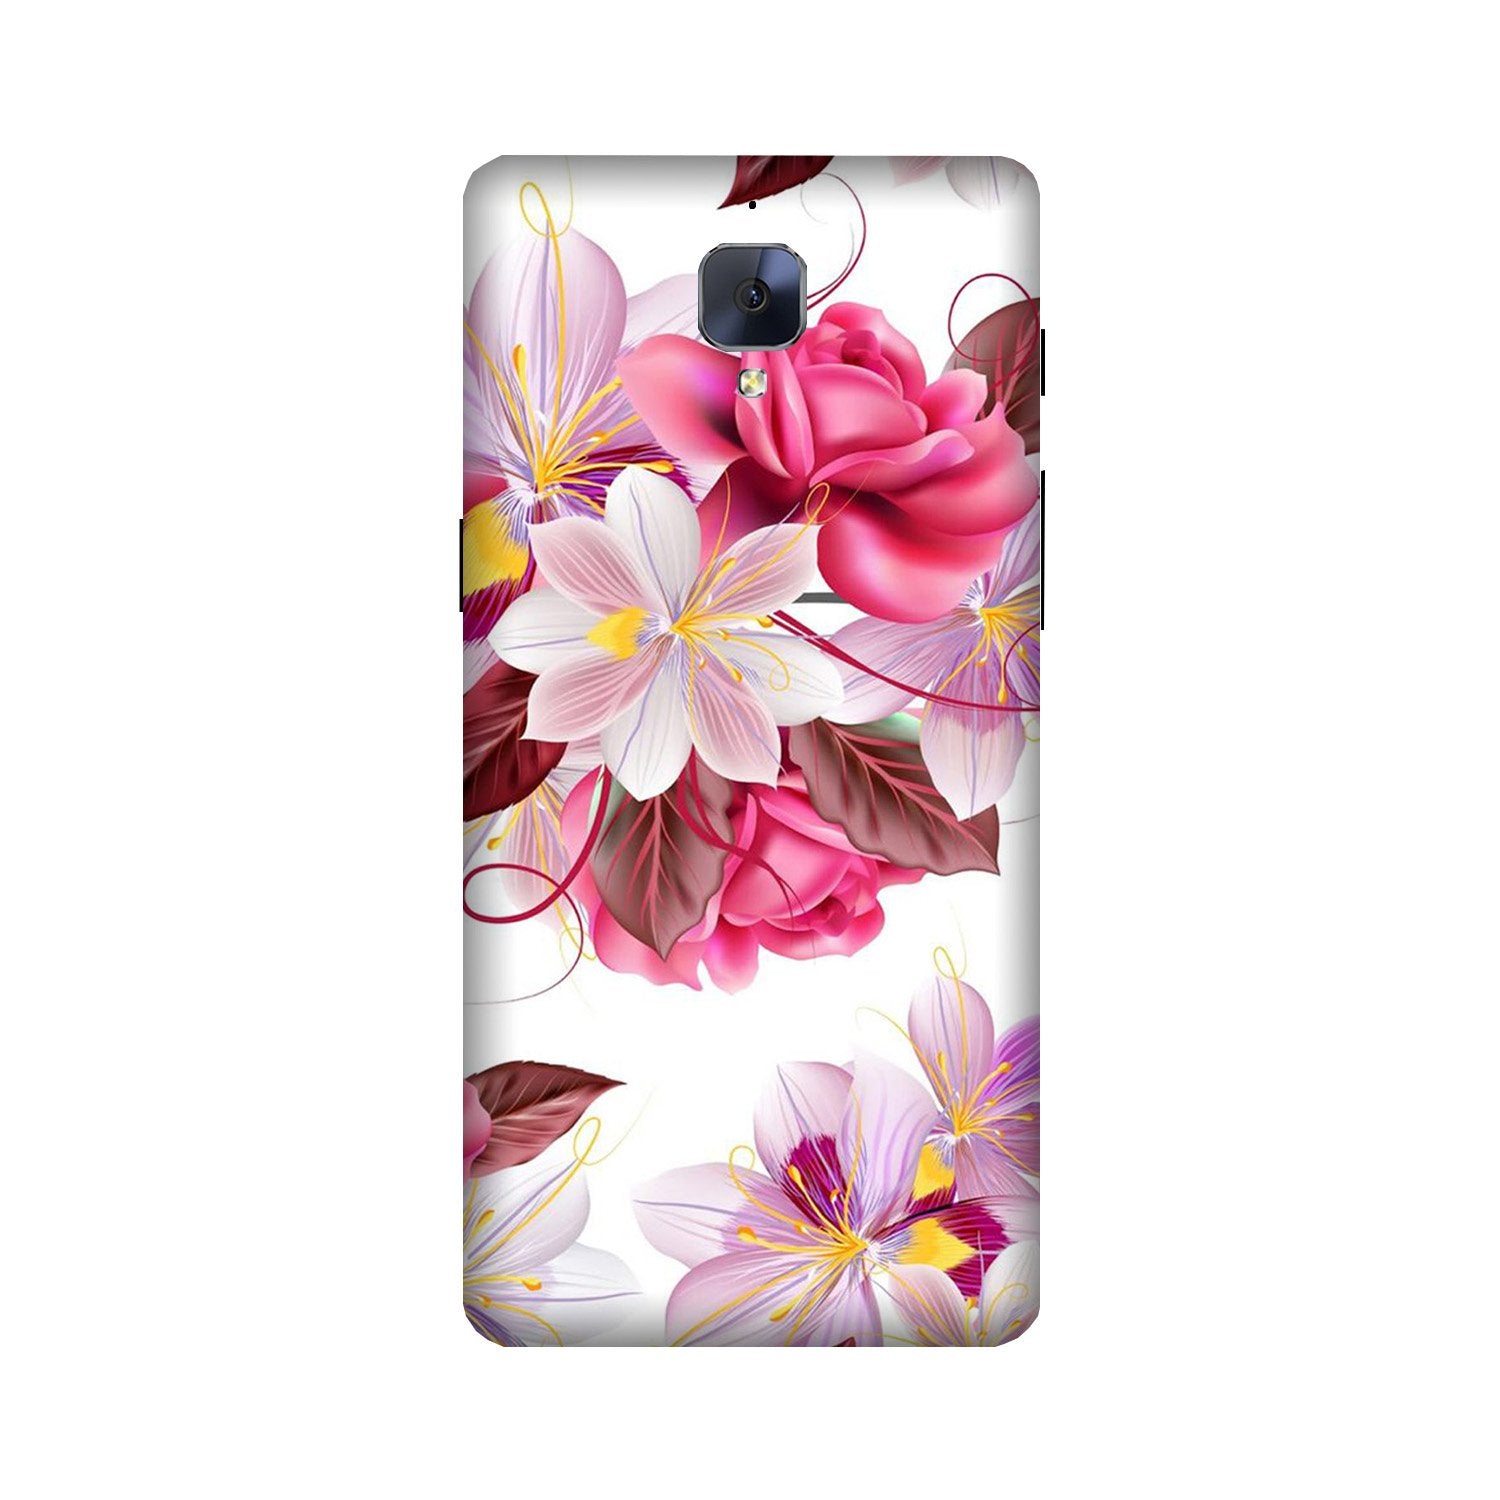 Beautiful flowers Case for OnePlus 3/ 3T